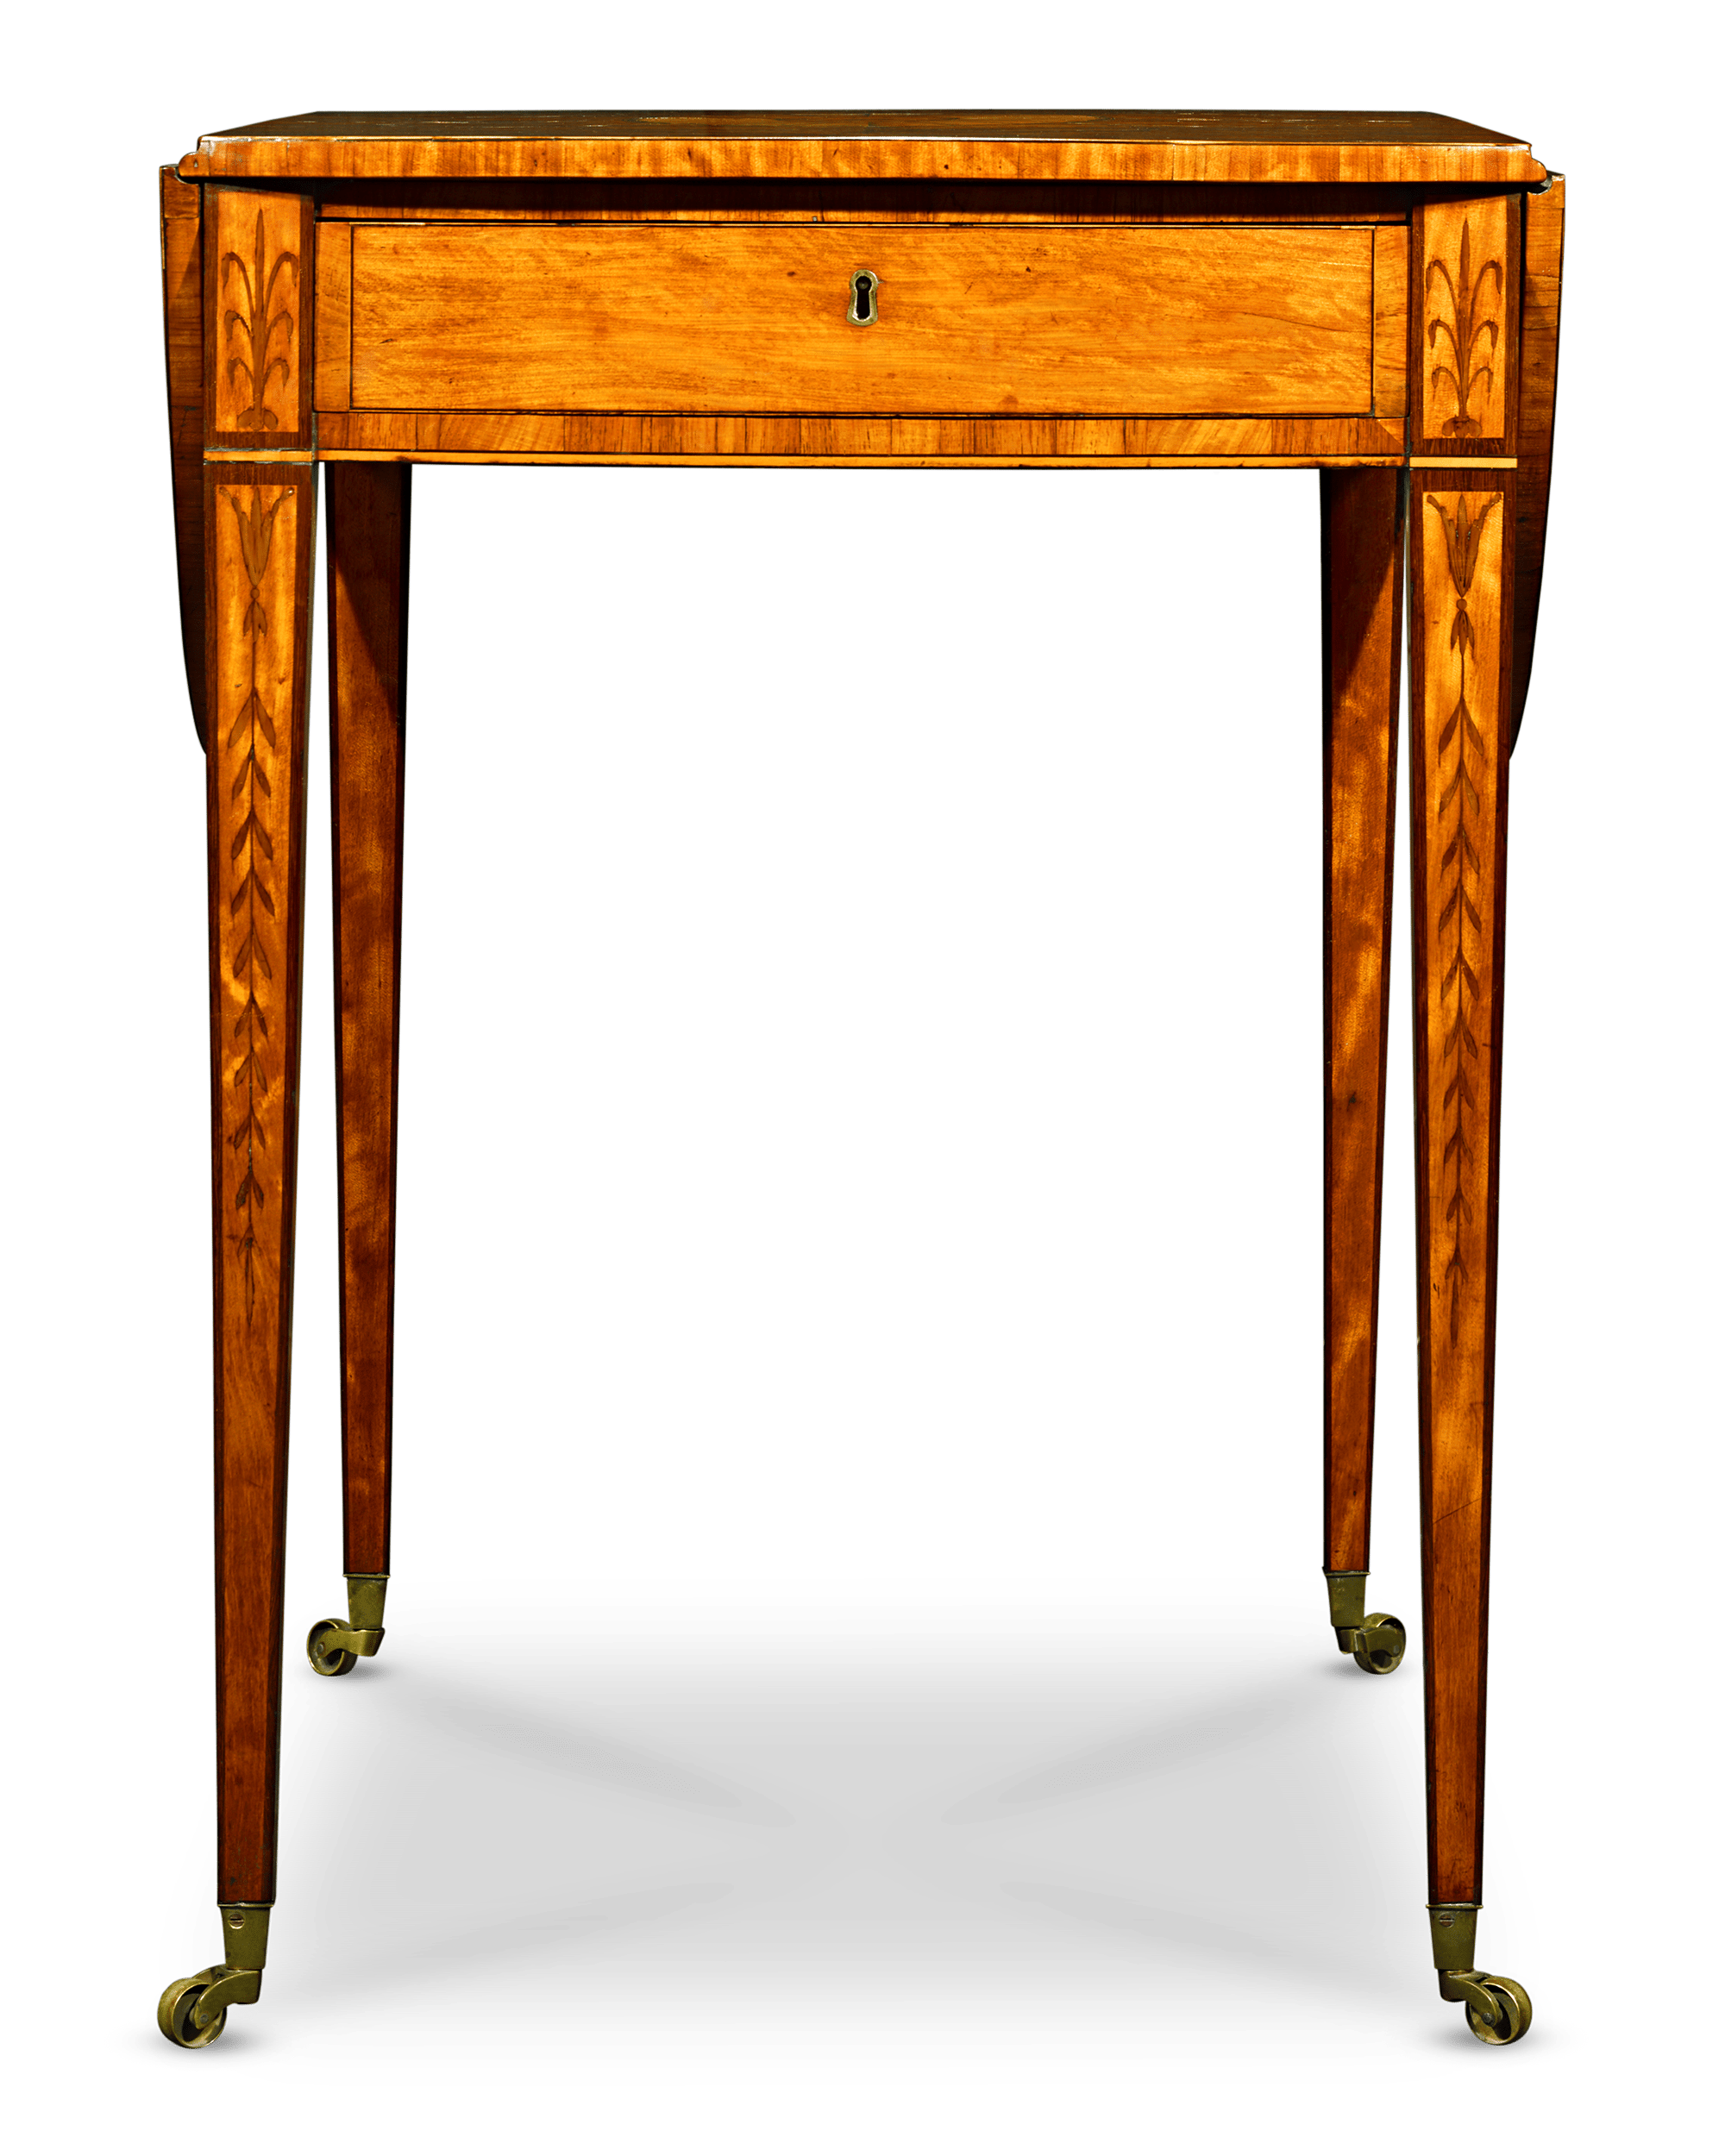 George III Pembroke Table attributed to Ince & Mayhew